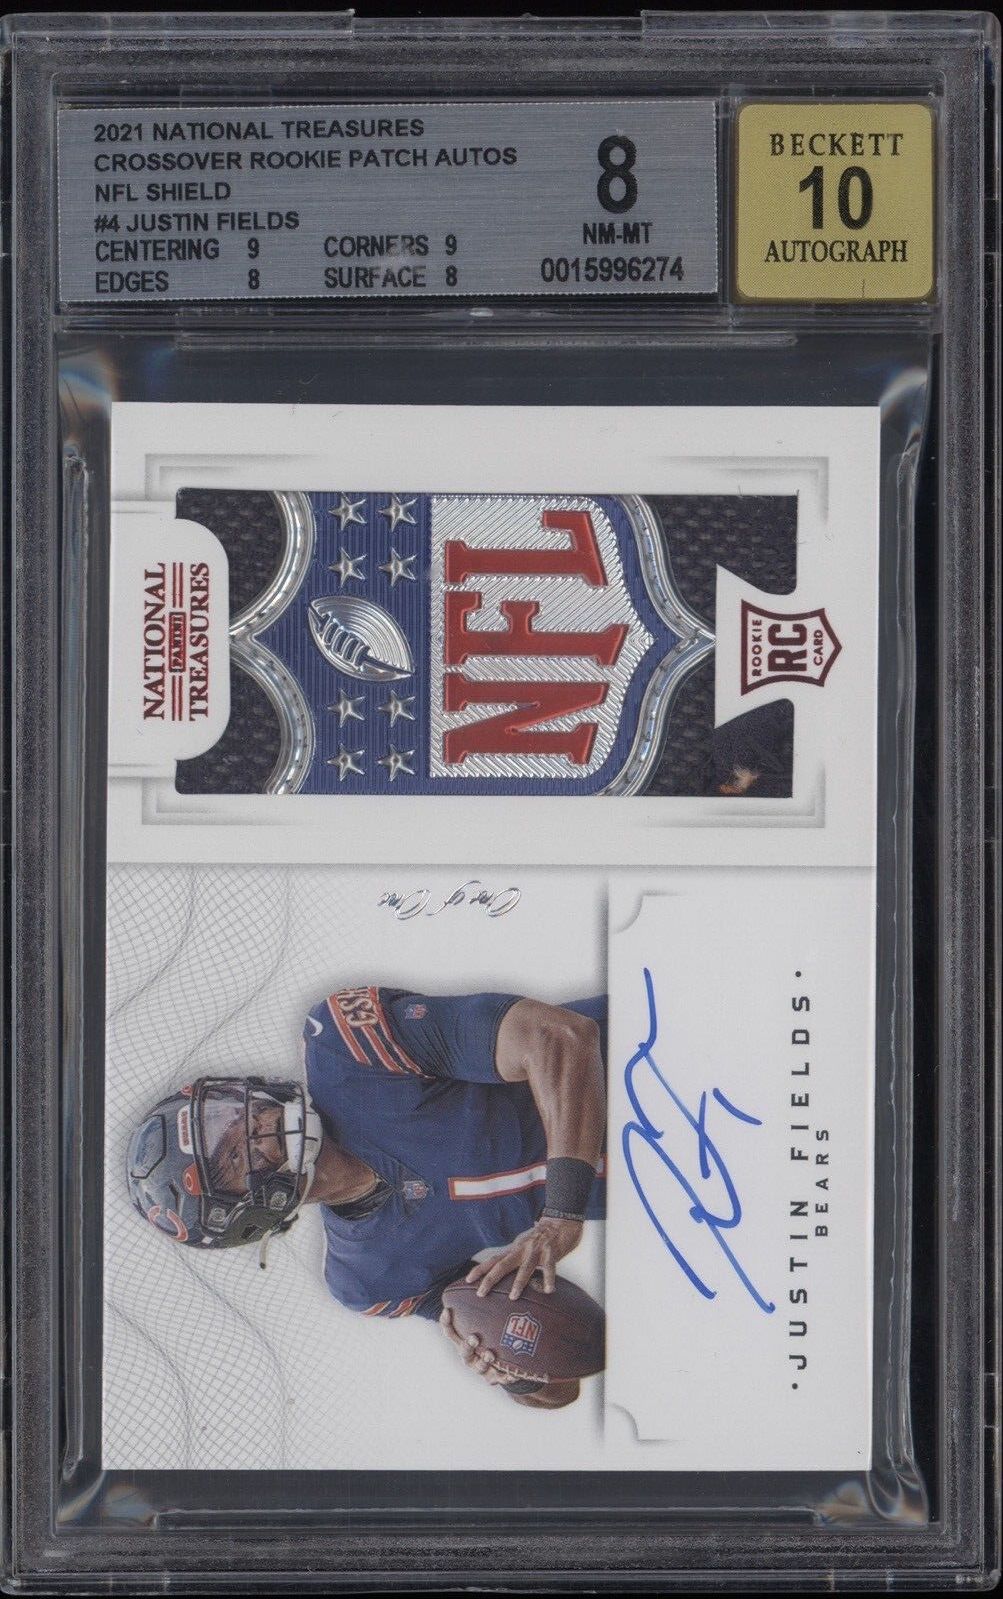 JUSTIN FIELDS 2021 NATIONAL TREASURES CROSSOVER ROOKIE PATCH AUTO SHIELD 1:1 BGS